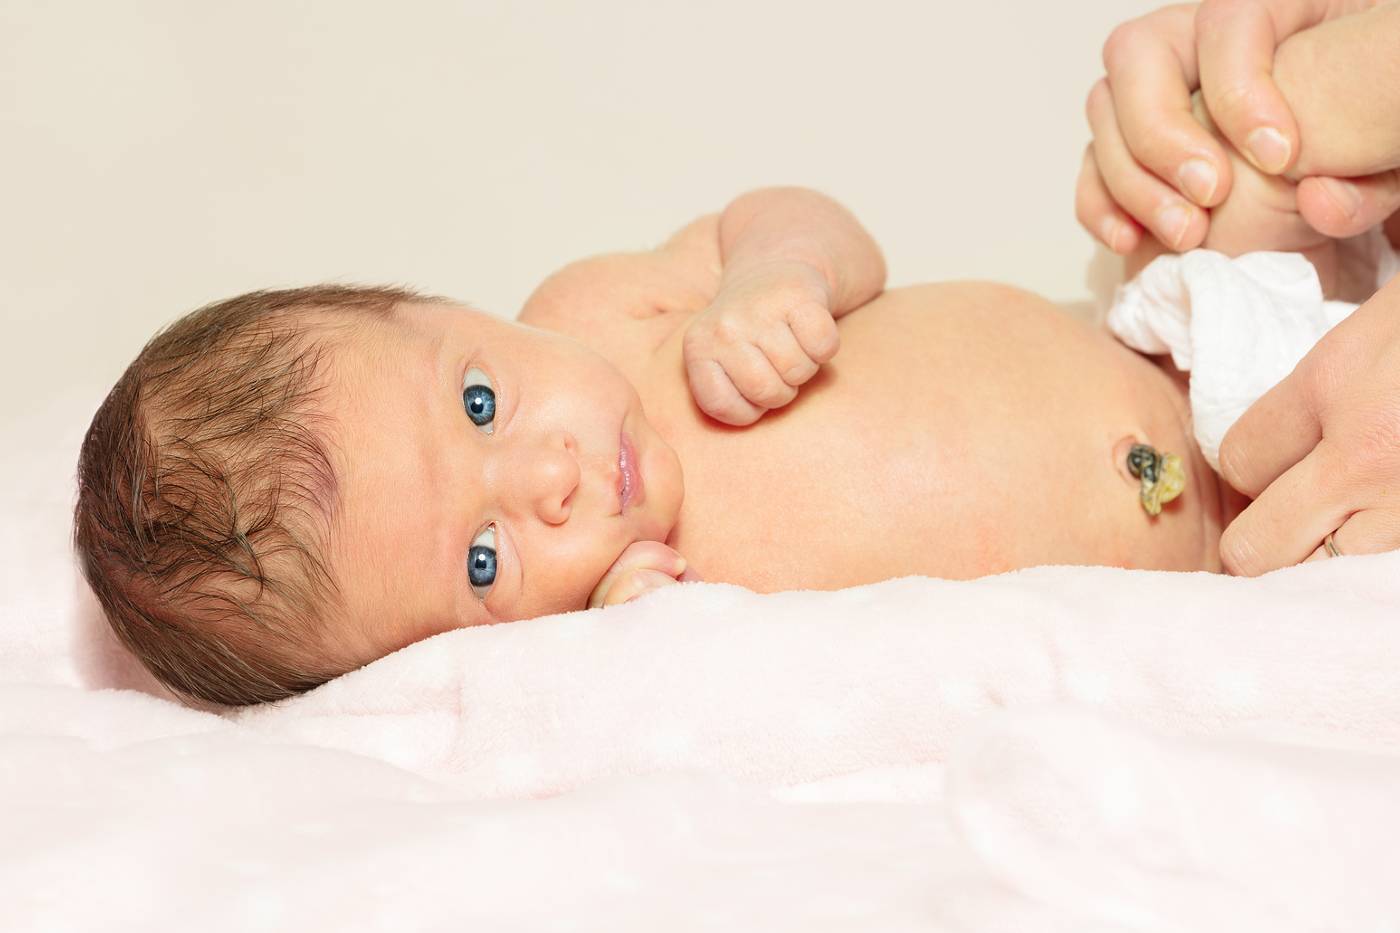 Umbilical Cord Care: Tips on Cleaning and Avoiding Infection